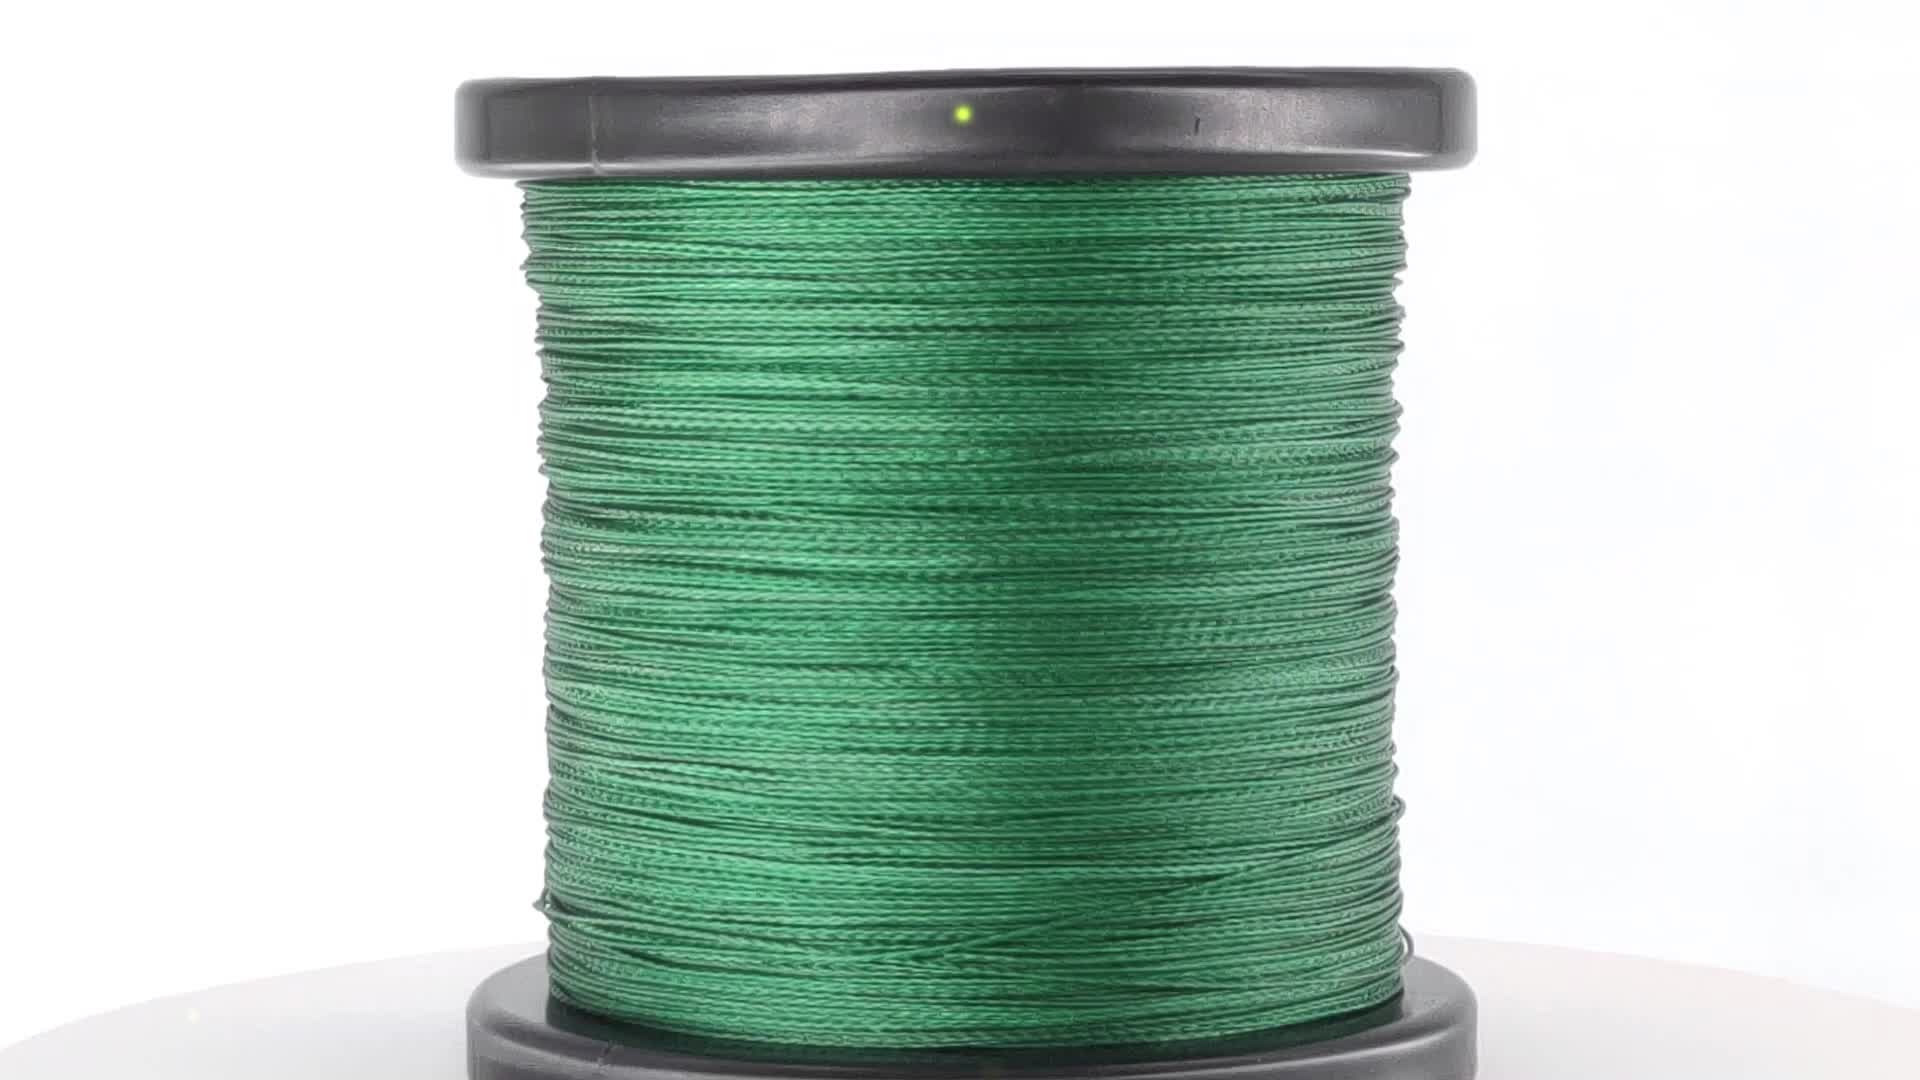 Samdely EaglePower Braided Fishing Line Abrasion Resistant Braided Lines  Superior Knot Strength, Test for Salt-Water, 10LB-80LB, 100-500 Yds, Blue  Camo, Ocean Blue, Green Blue Camo 80LB(500YDS)